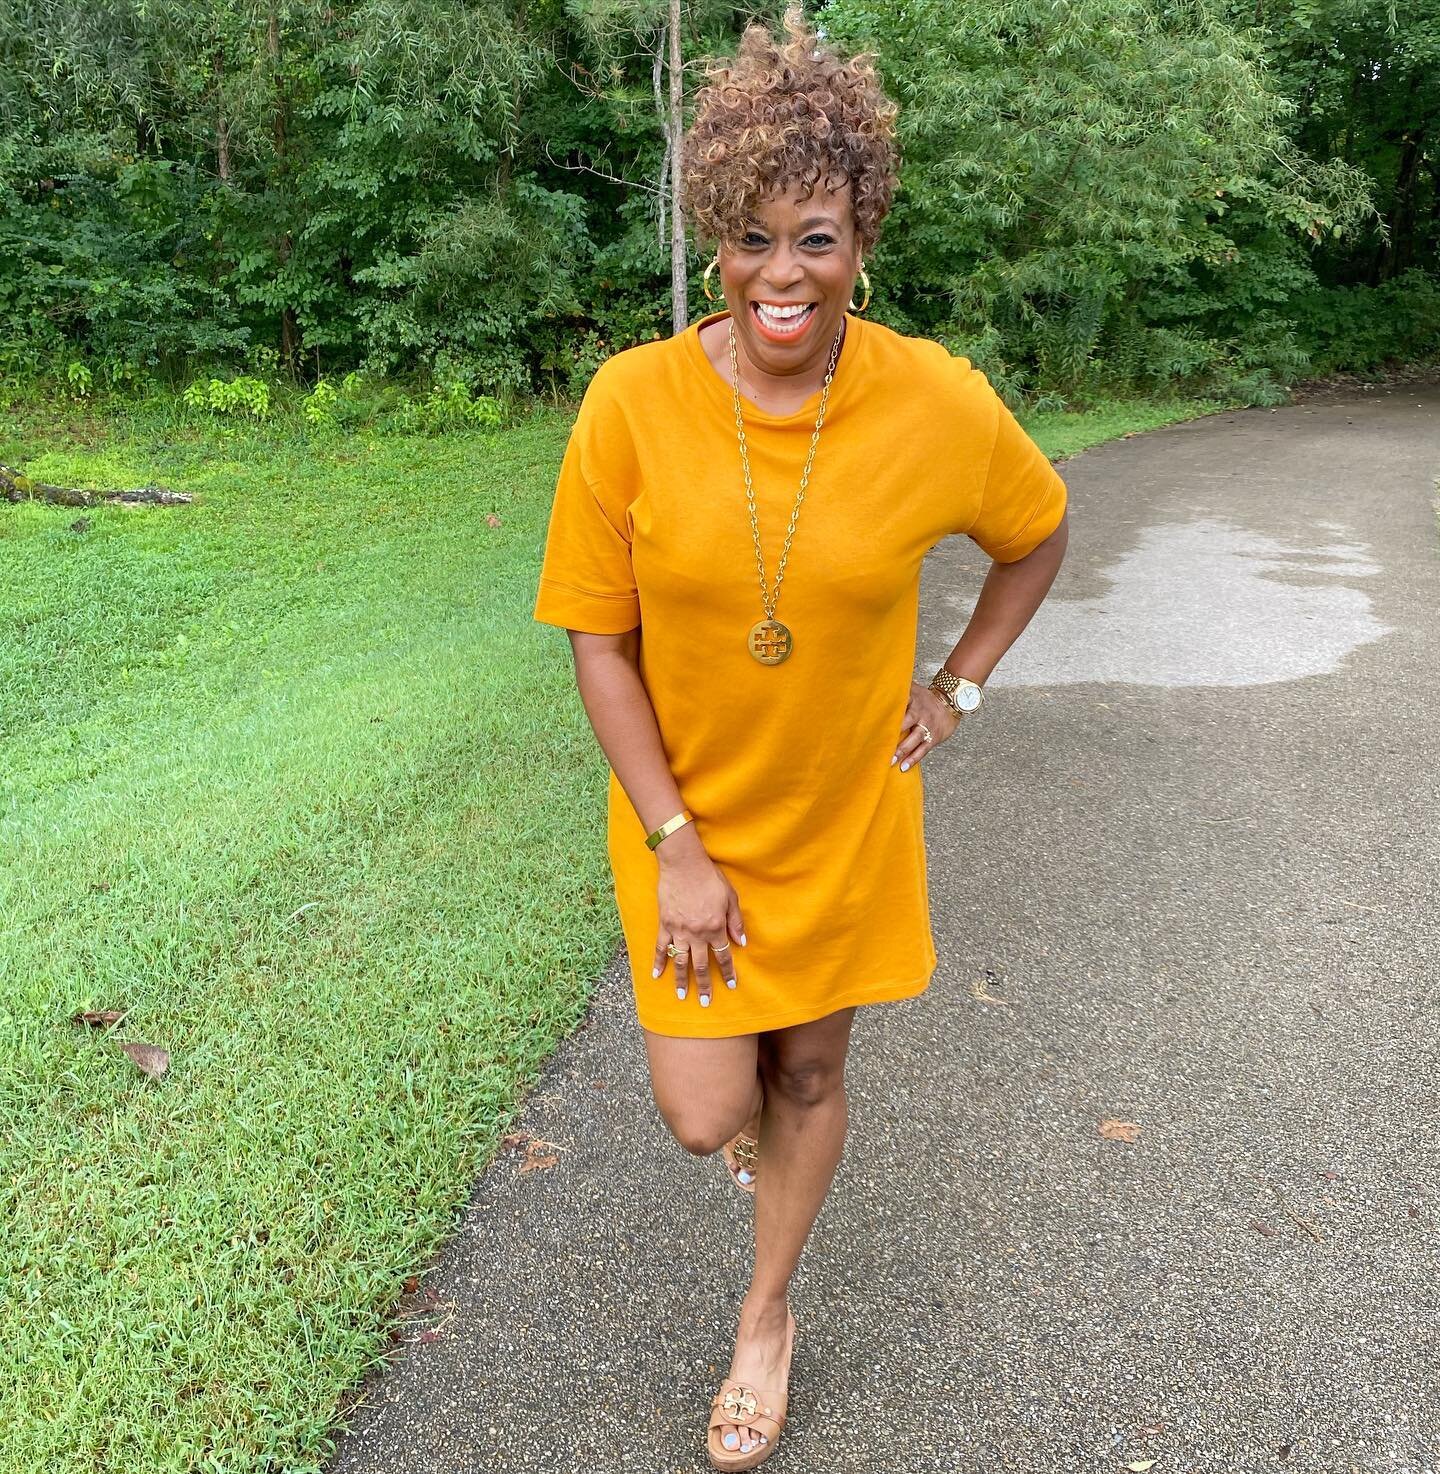 G R A T I T U D E 🧡
*
Happy Sunday! Starting the week off with gratitude and a SMILE. Grateful for the little things in a challenging world. Happiness is an inside job. Do small things each day to create a positive mindset. Don&rsquo;t let nothing s